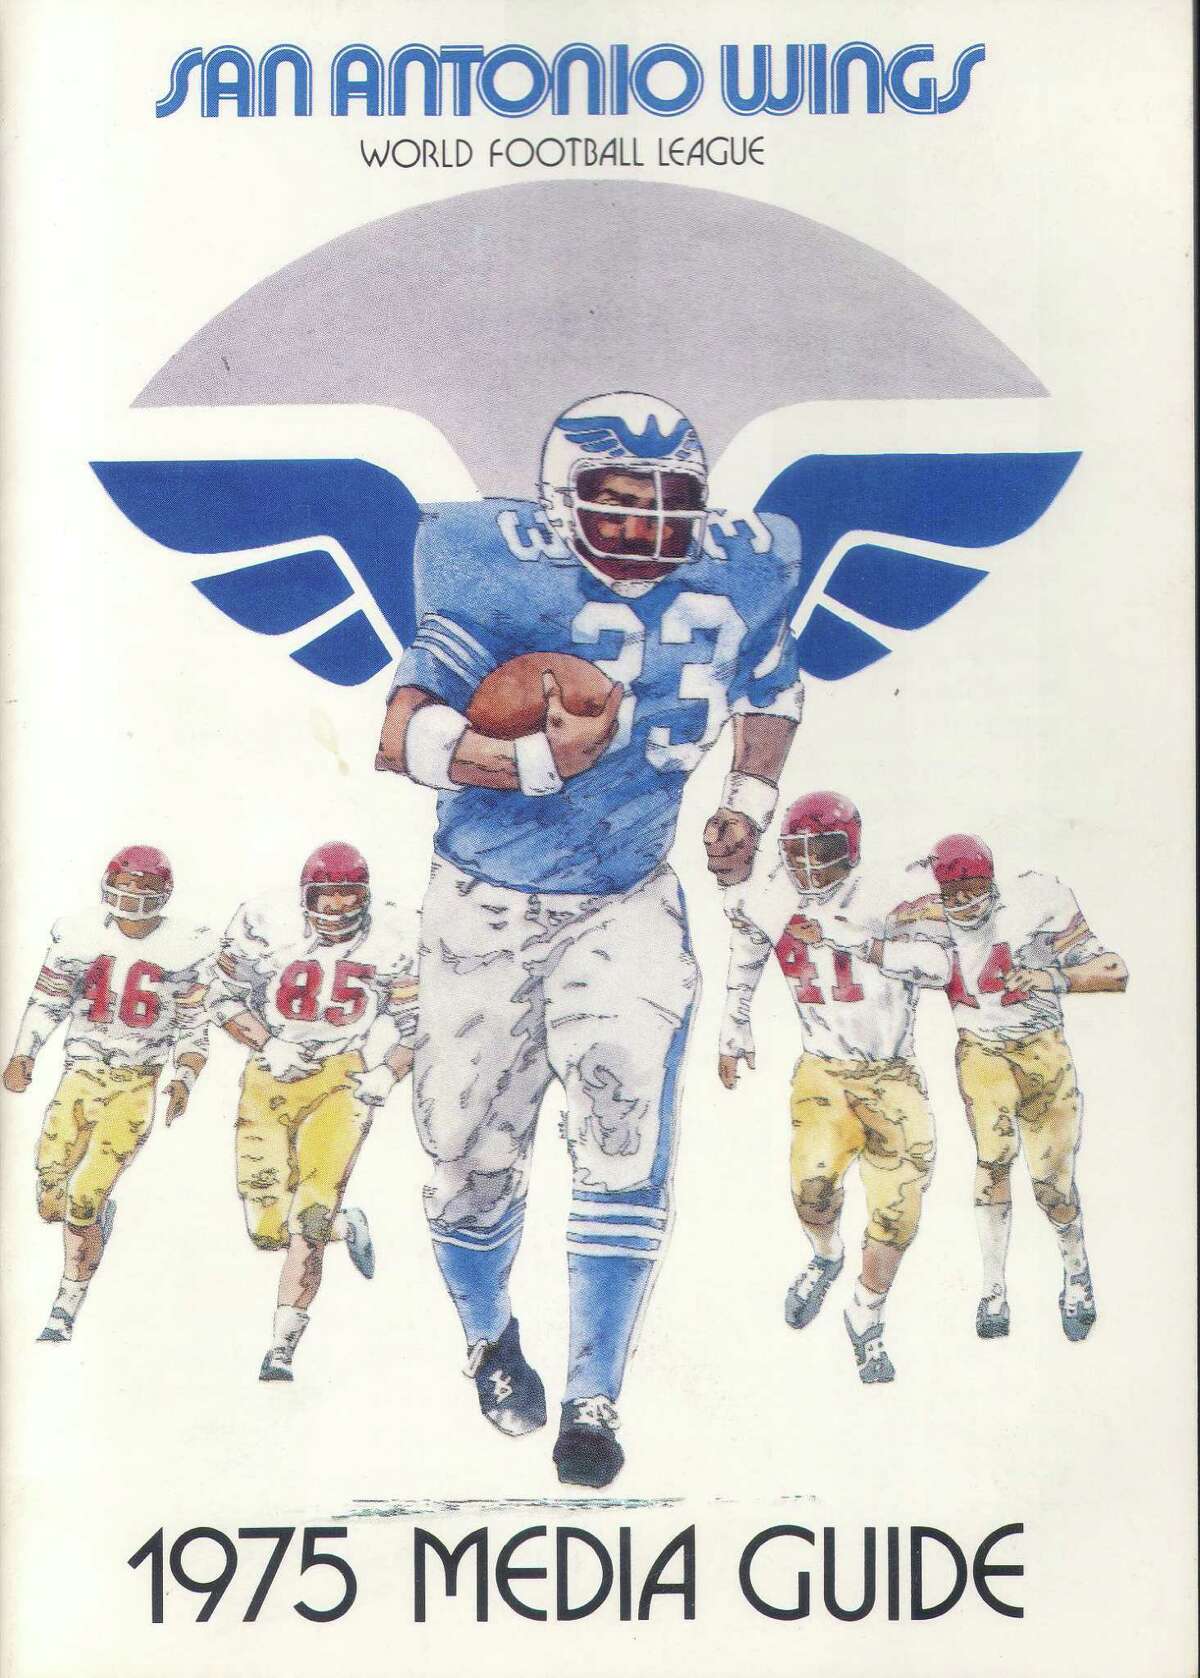 The 1975 media guide for the San Antonio Wings of the World Football League.